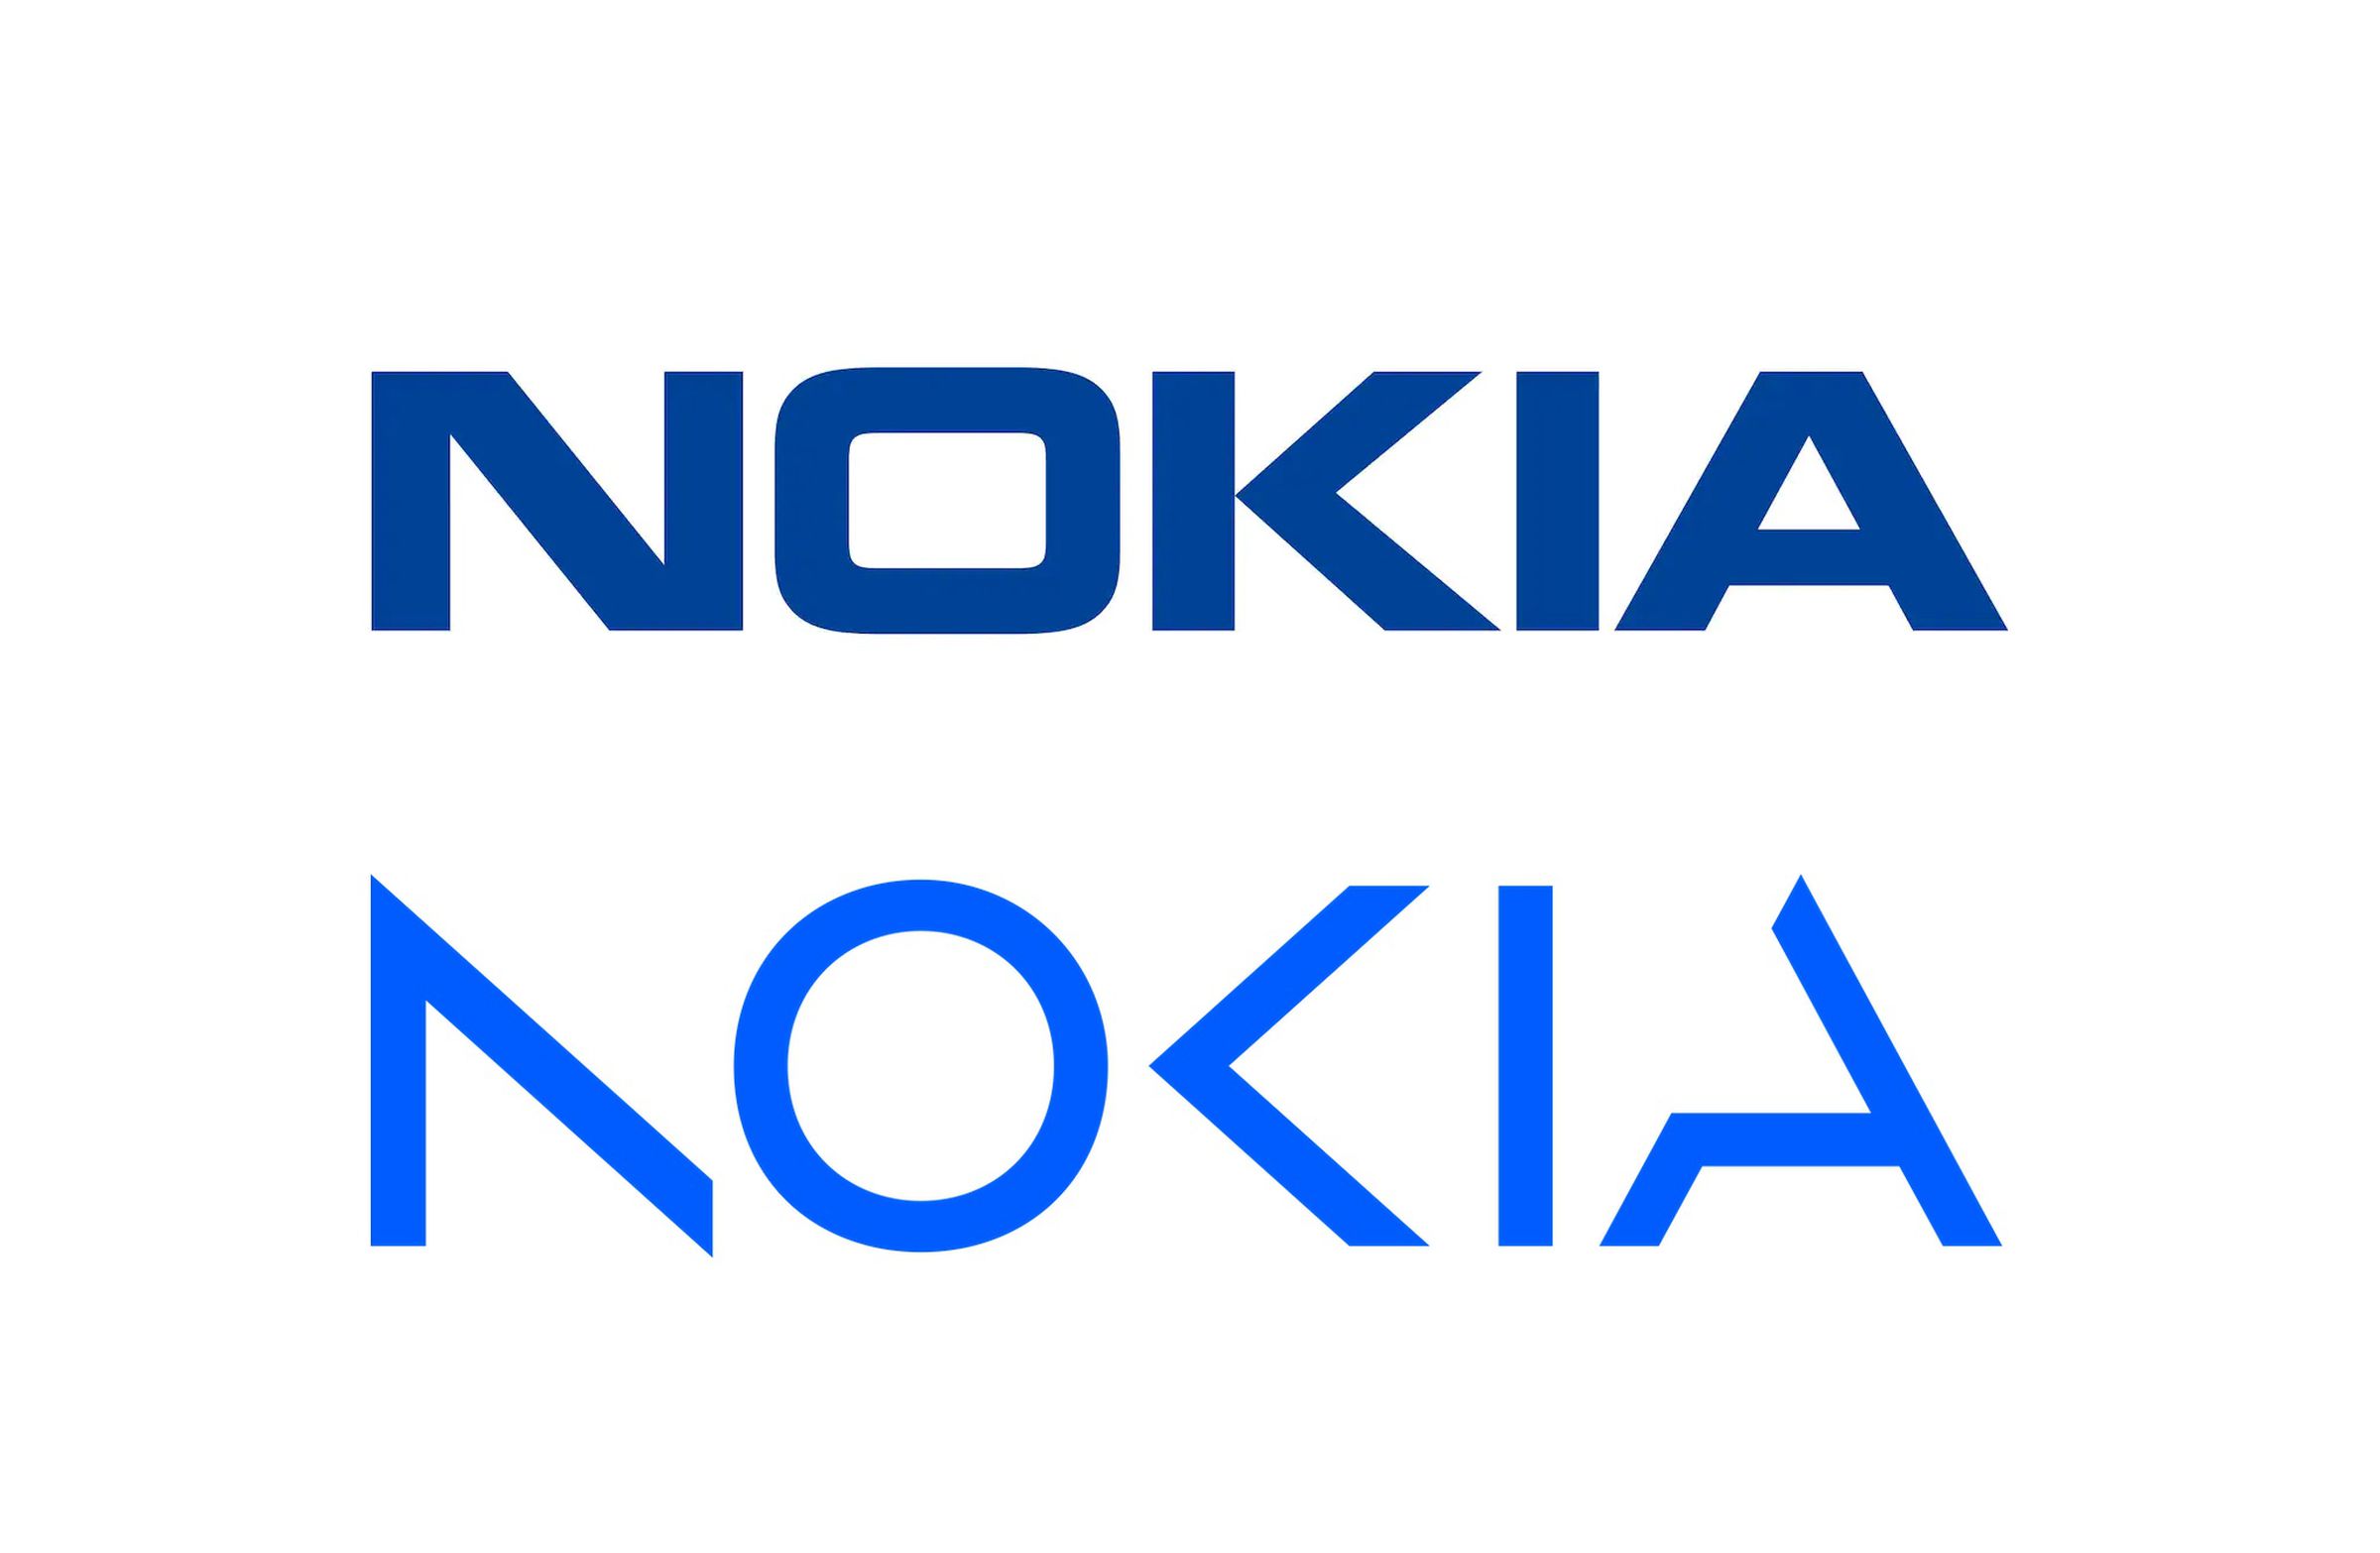 Images showing Nokia's old and new logos.